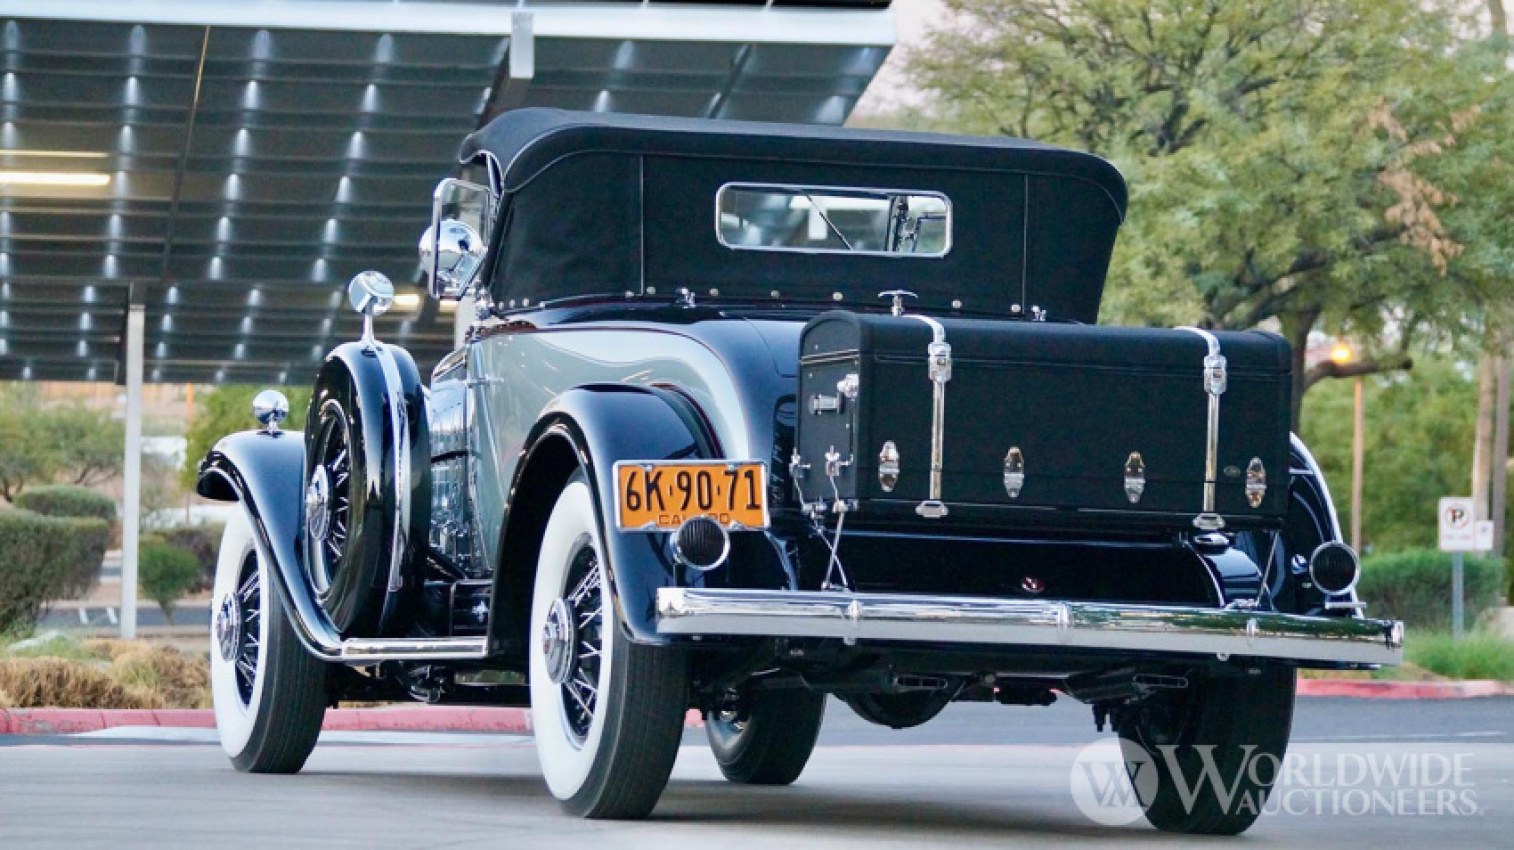 autos, cadillac, cars, american, asian, celebrity, classic, client, europe, exotic, features, handpicked, luxury, modern classic, muscle, news, newsletter, off-road, sports, trucks, 1930 cadillac 452 has a massive v16 engine